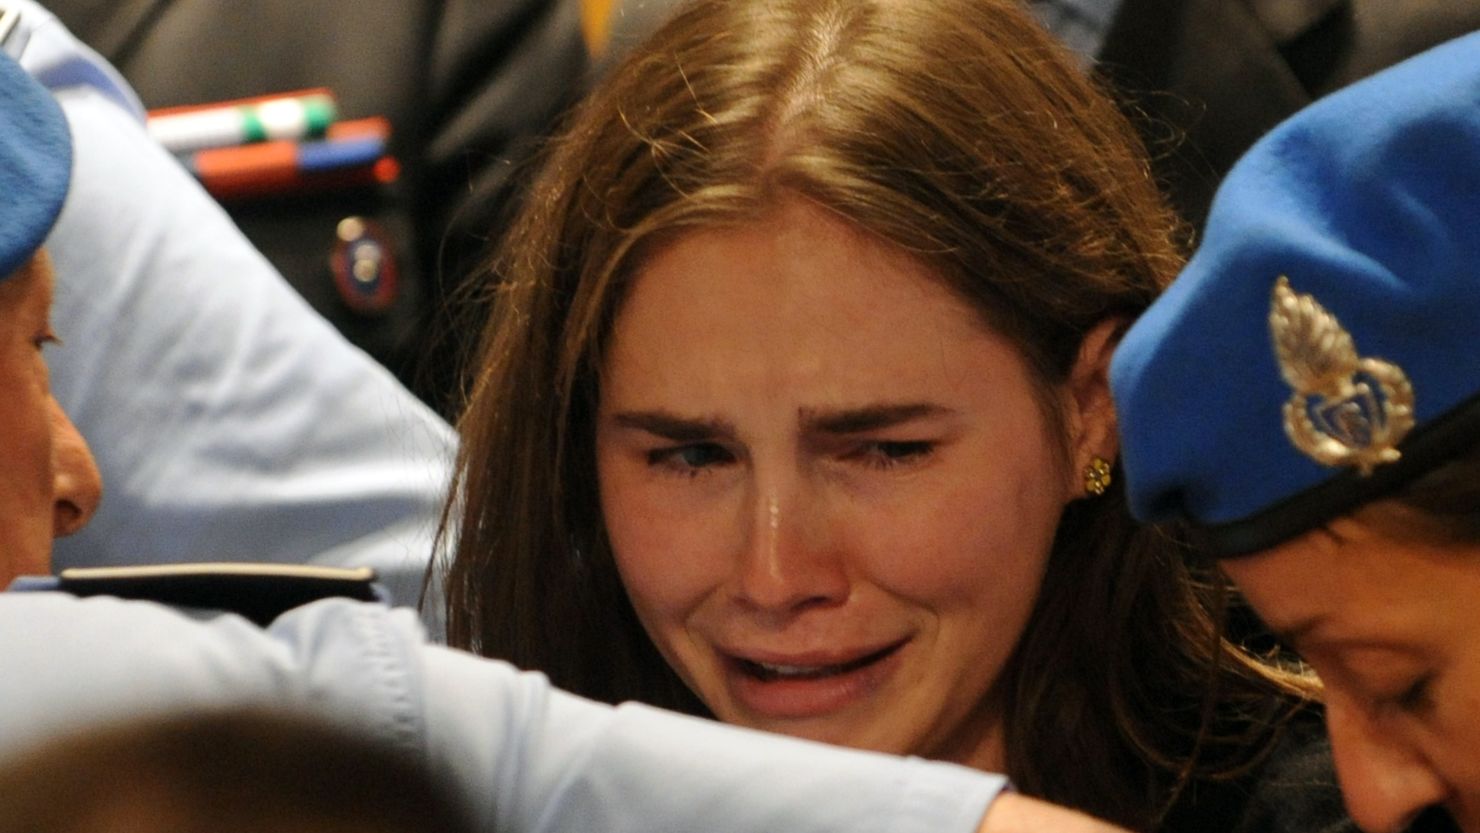 Amanda Knox reacts to the announcement of the acquitted verdict of her appeal trial at Perugia's court in 2010.